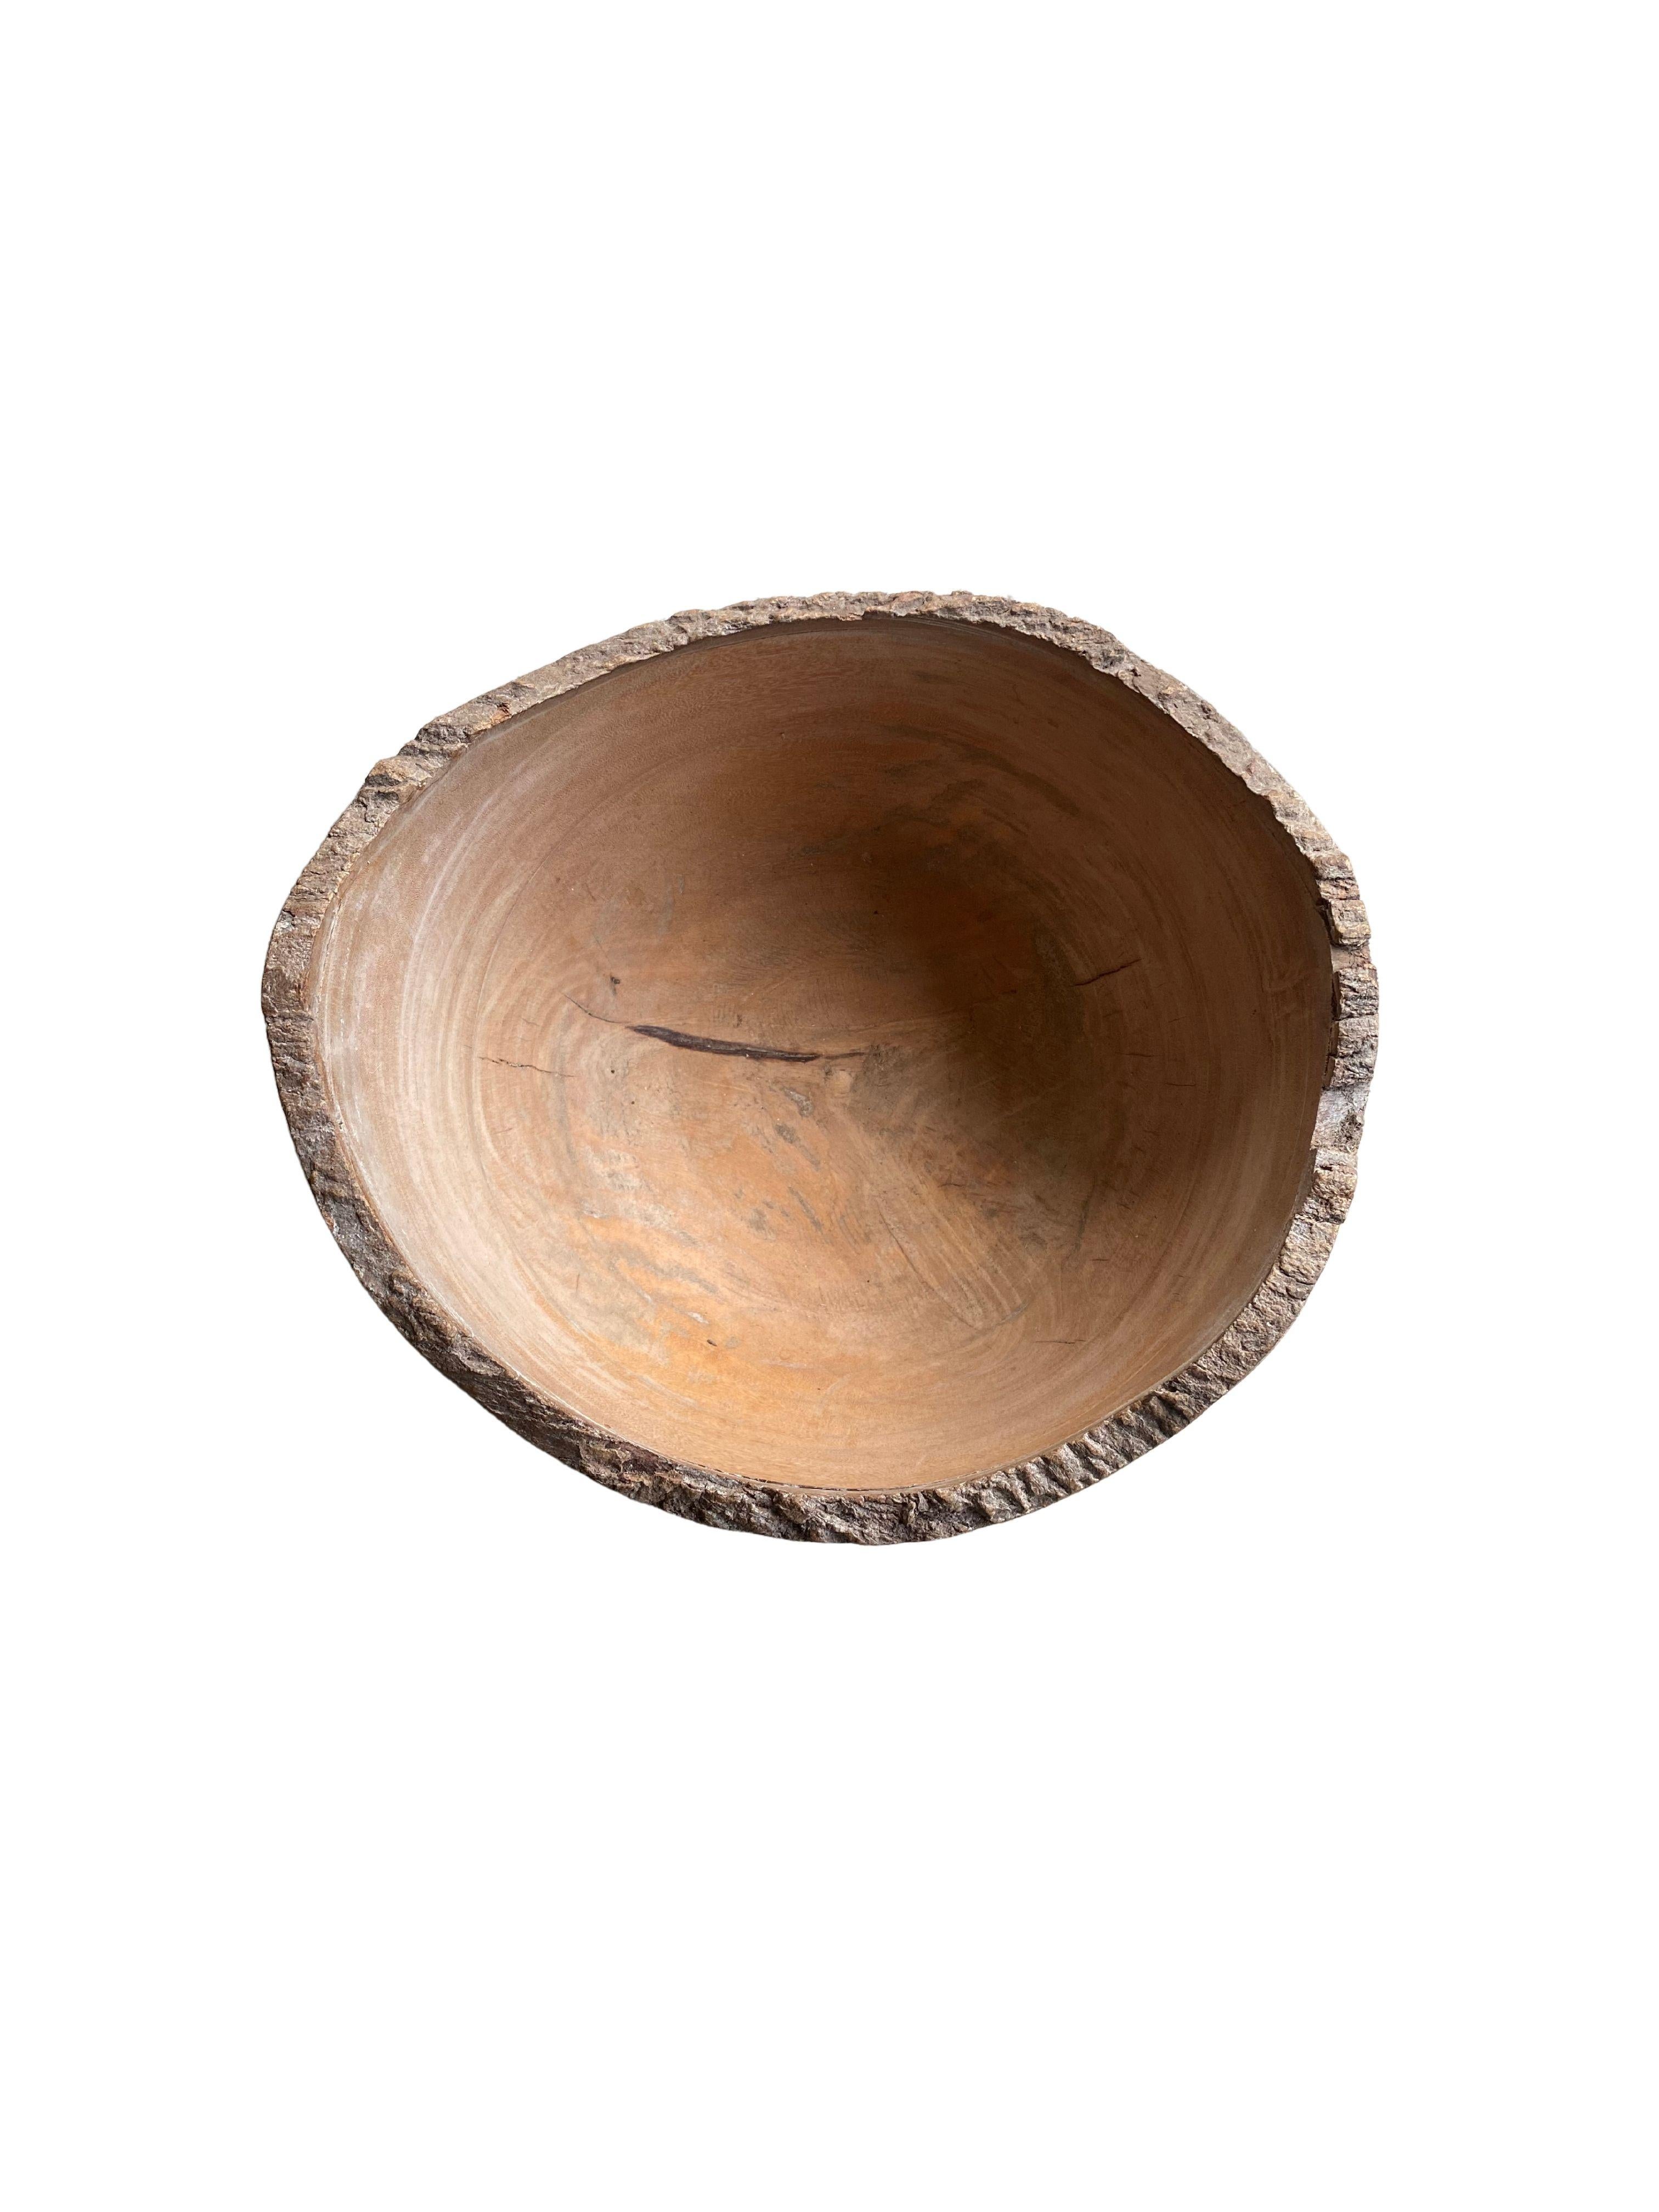 Other Solid Teak Burl Wood Bowl from Java, Indonesia For Sale